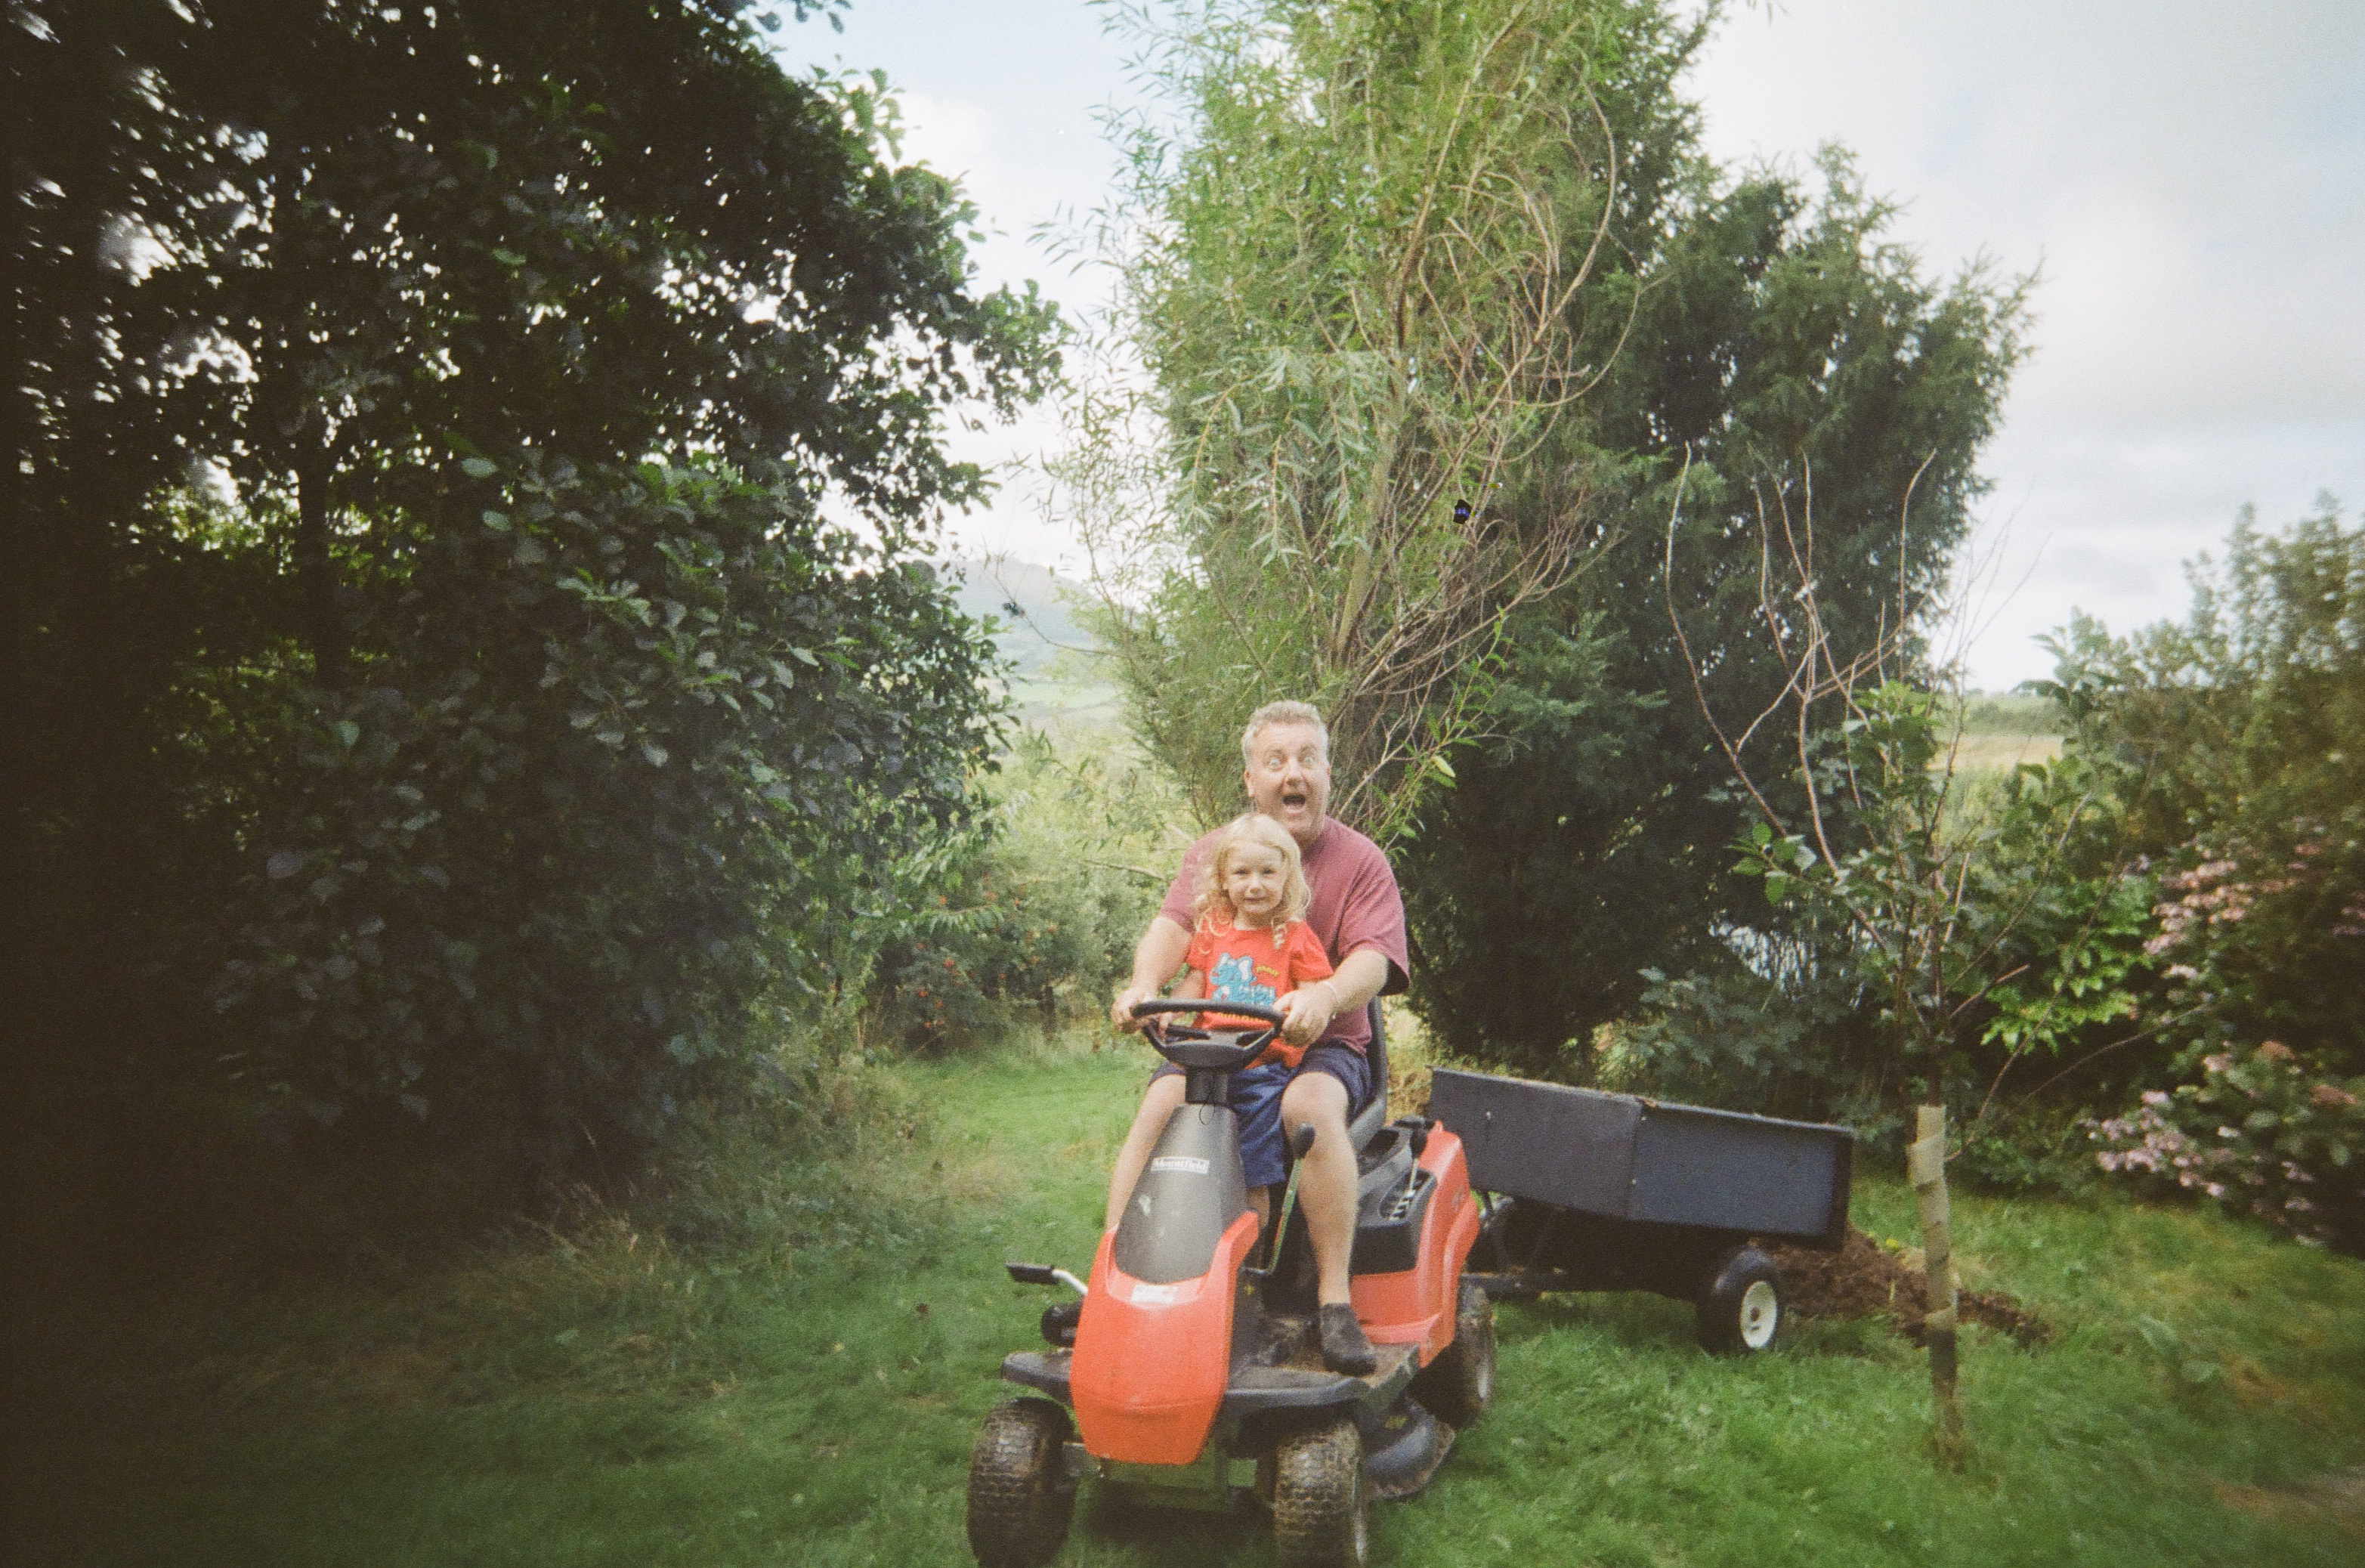 Jonathan Baxter and Lewis (front) riding a lawn mower